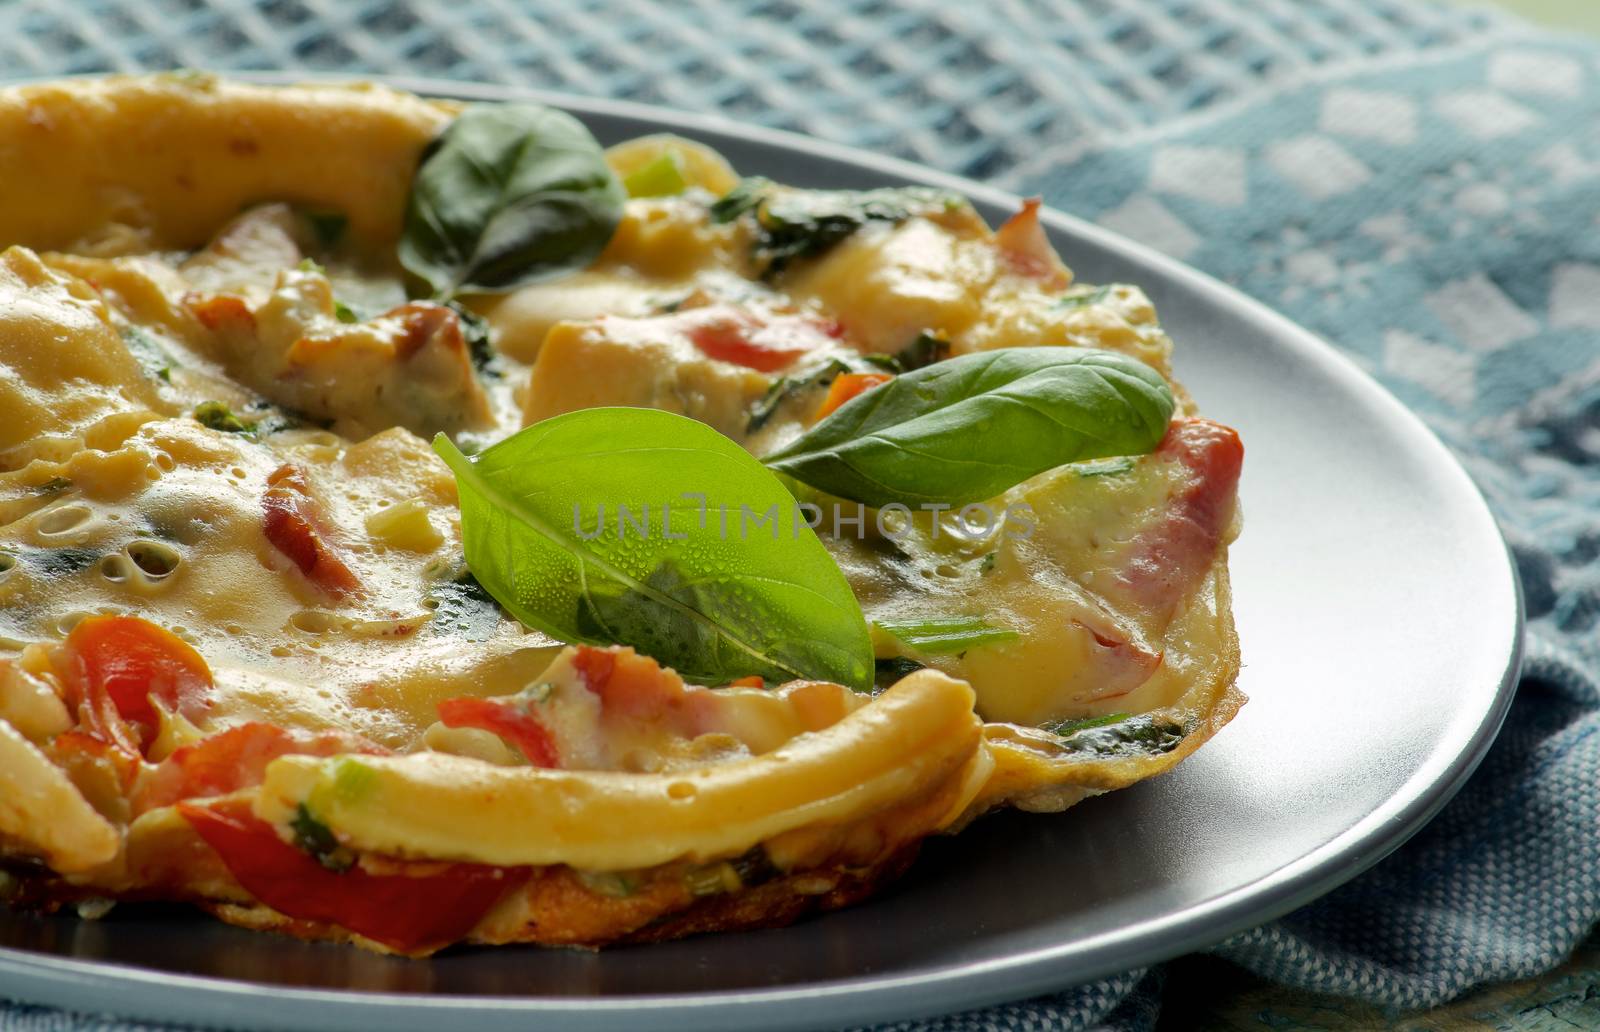 Fluffy Omelet with Vegetables, Greens and Basil Leafs on Grey Plate against Light. Selective Focus